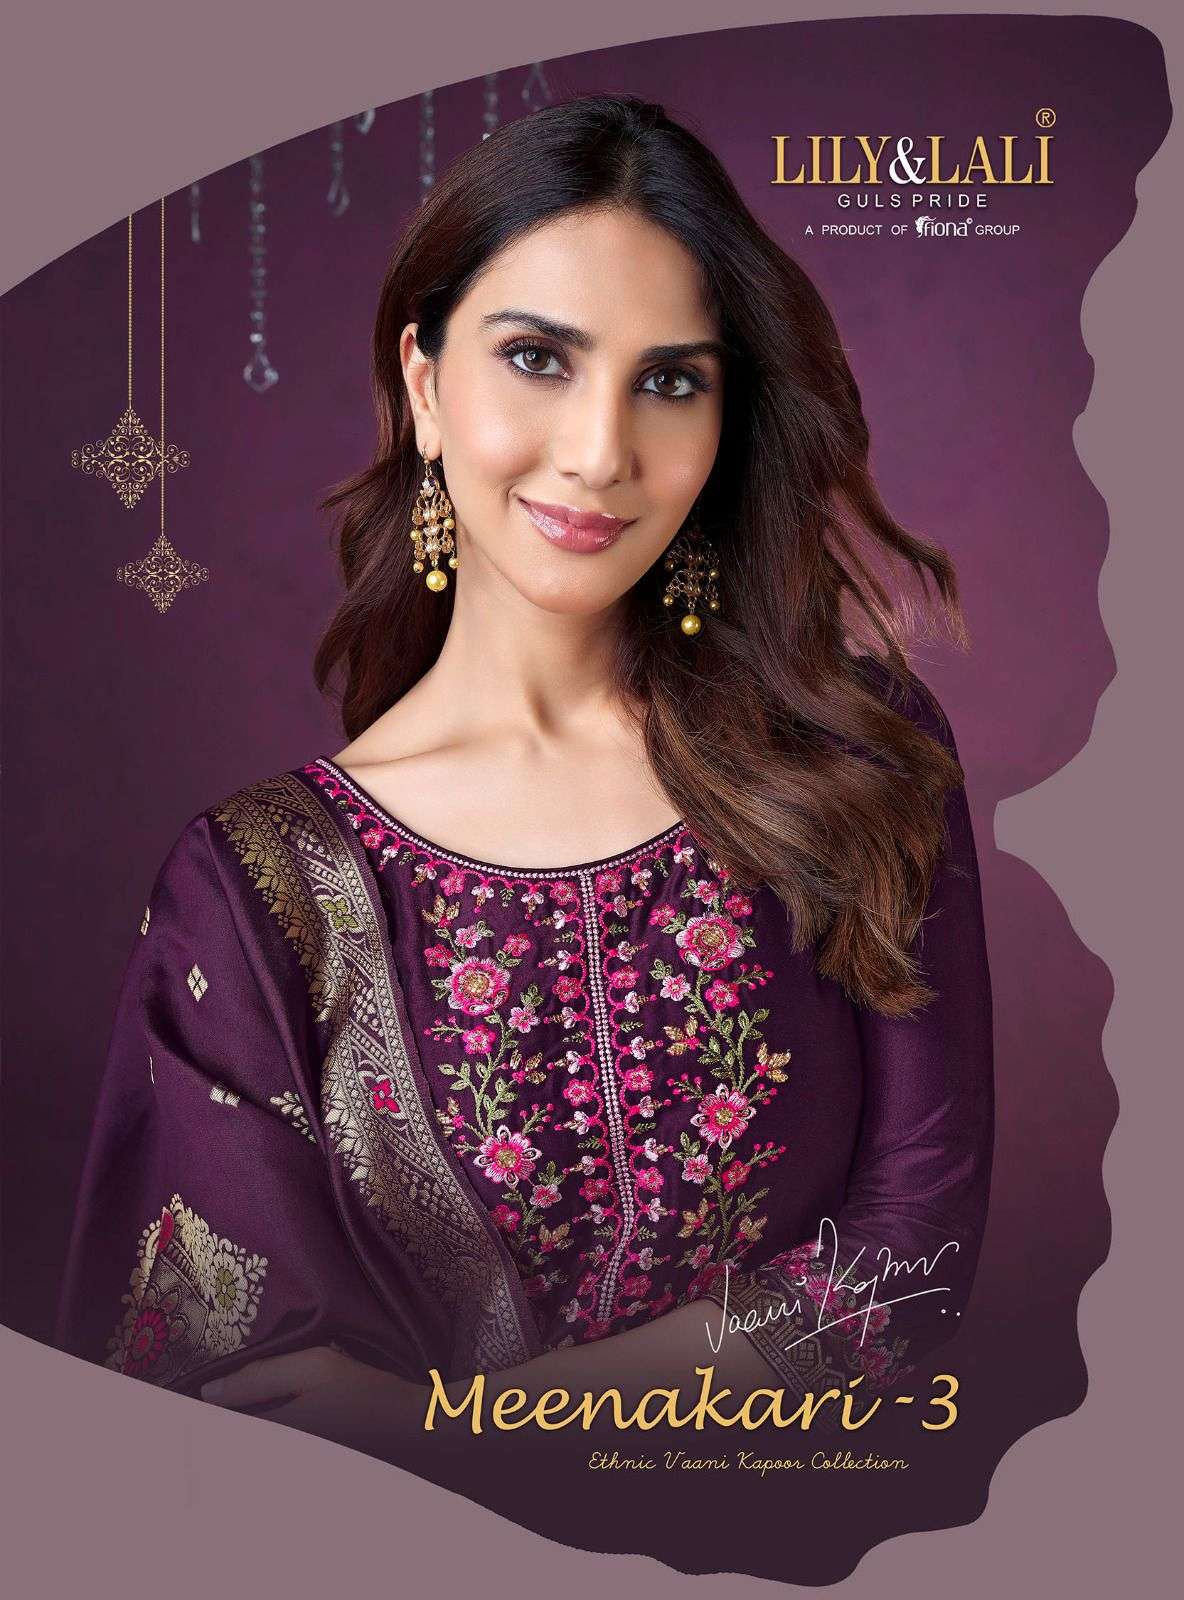 Lily Lali Meenakari vol 3 Silk with Embroidery and Handwork ...